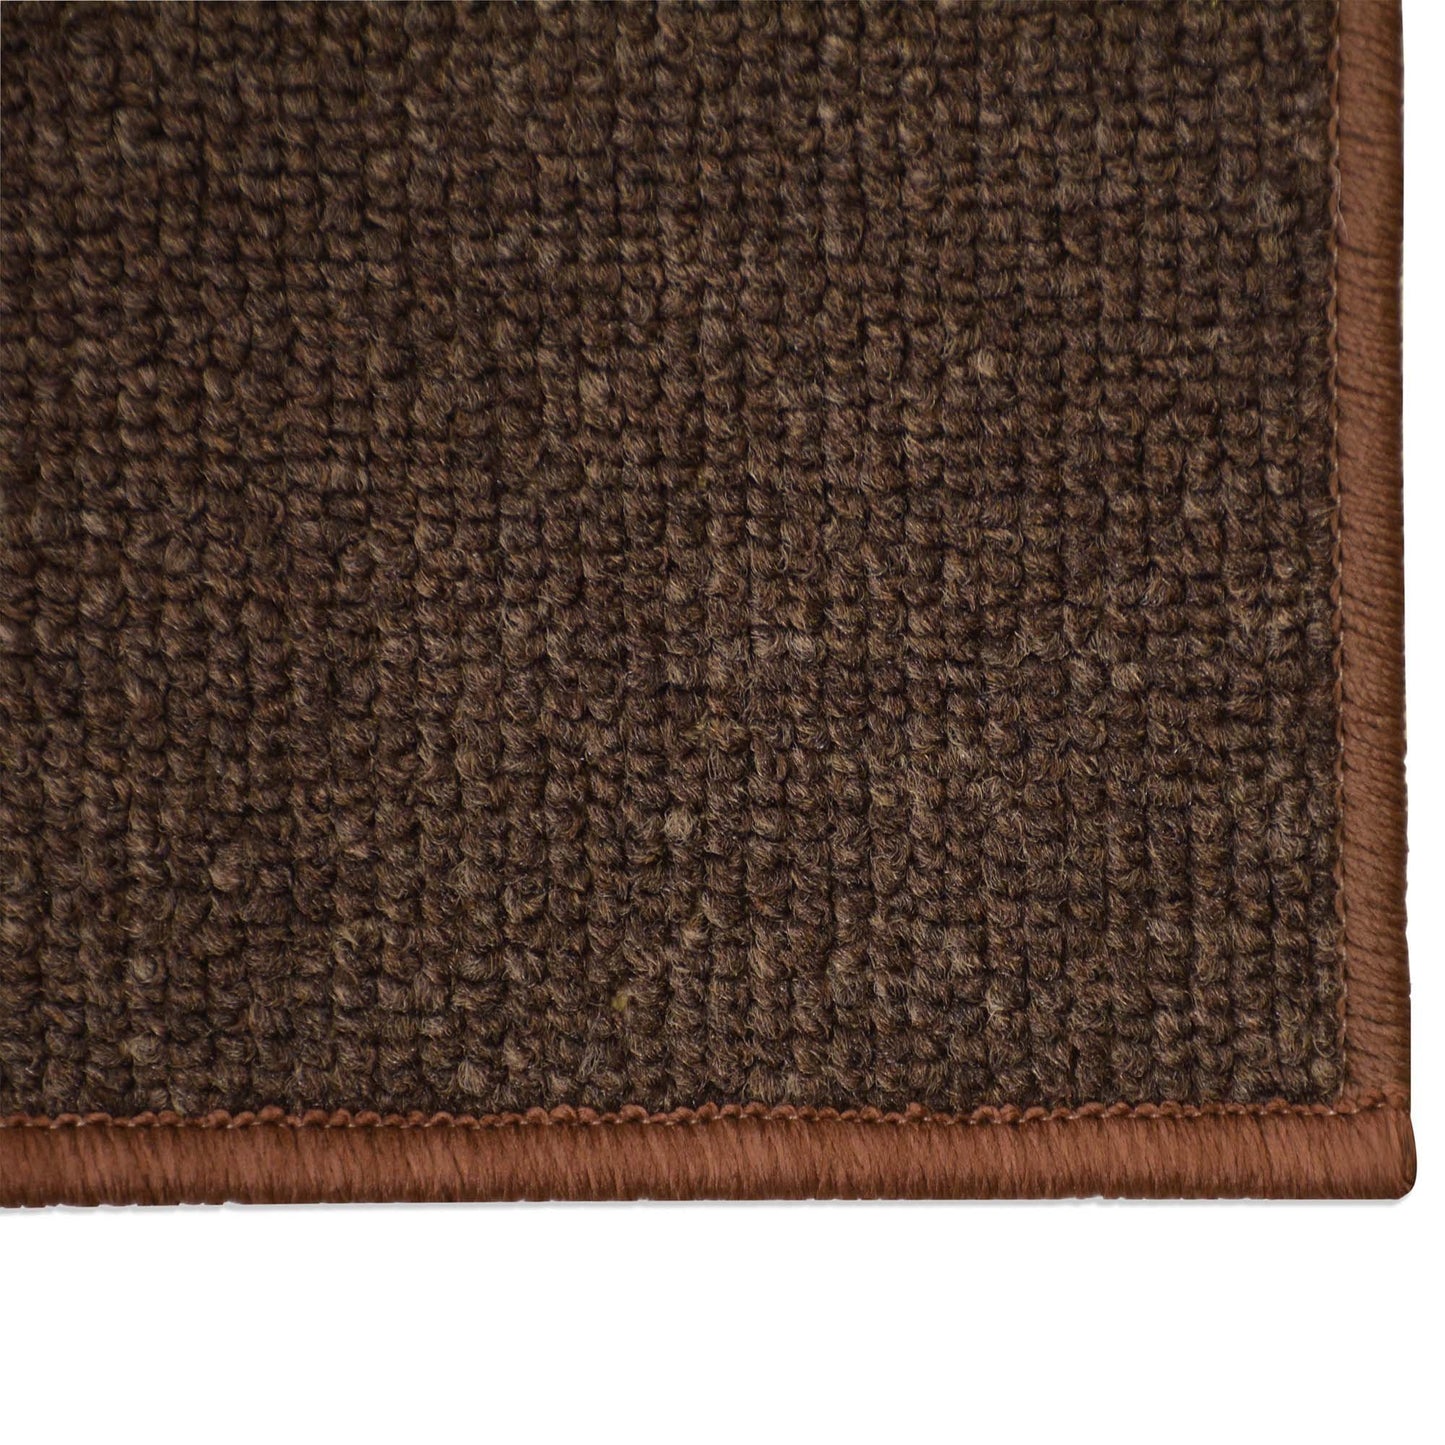 Machine Washable Custom Size Runner Rug Berber Solid Brown Skid Resistant Cut To Size Area rug Runners Customize By Feet and 26 inch Width